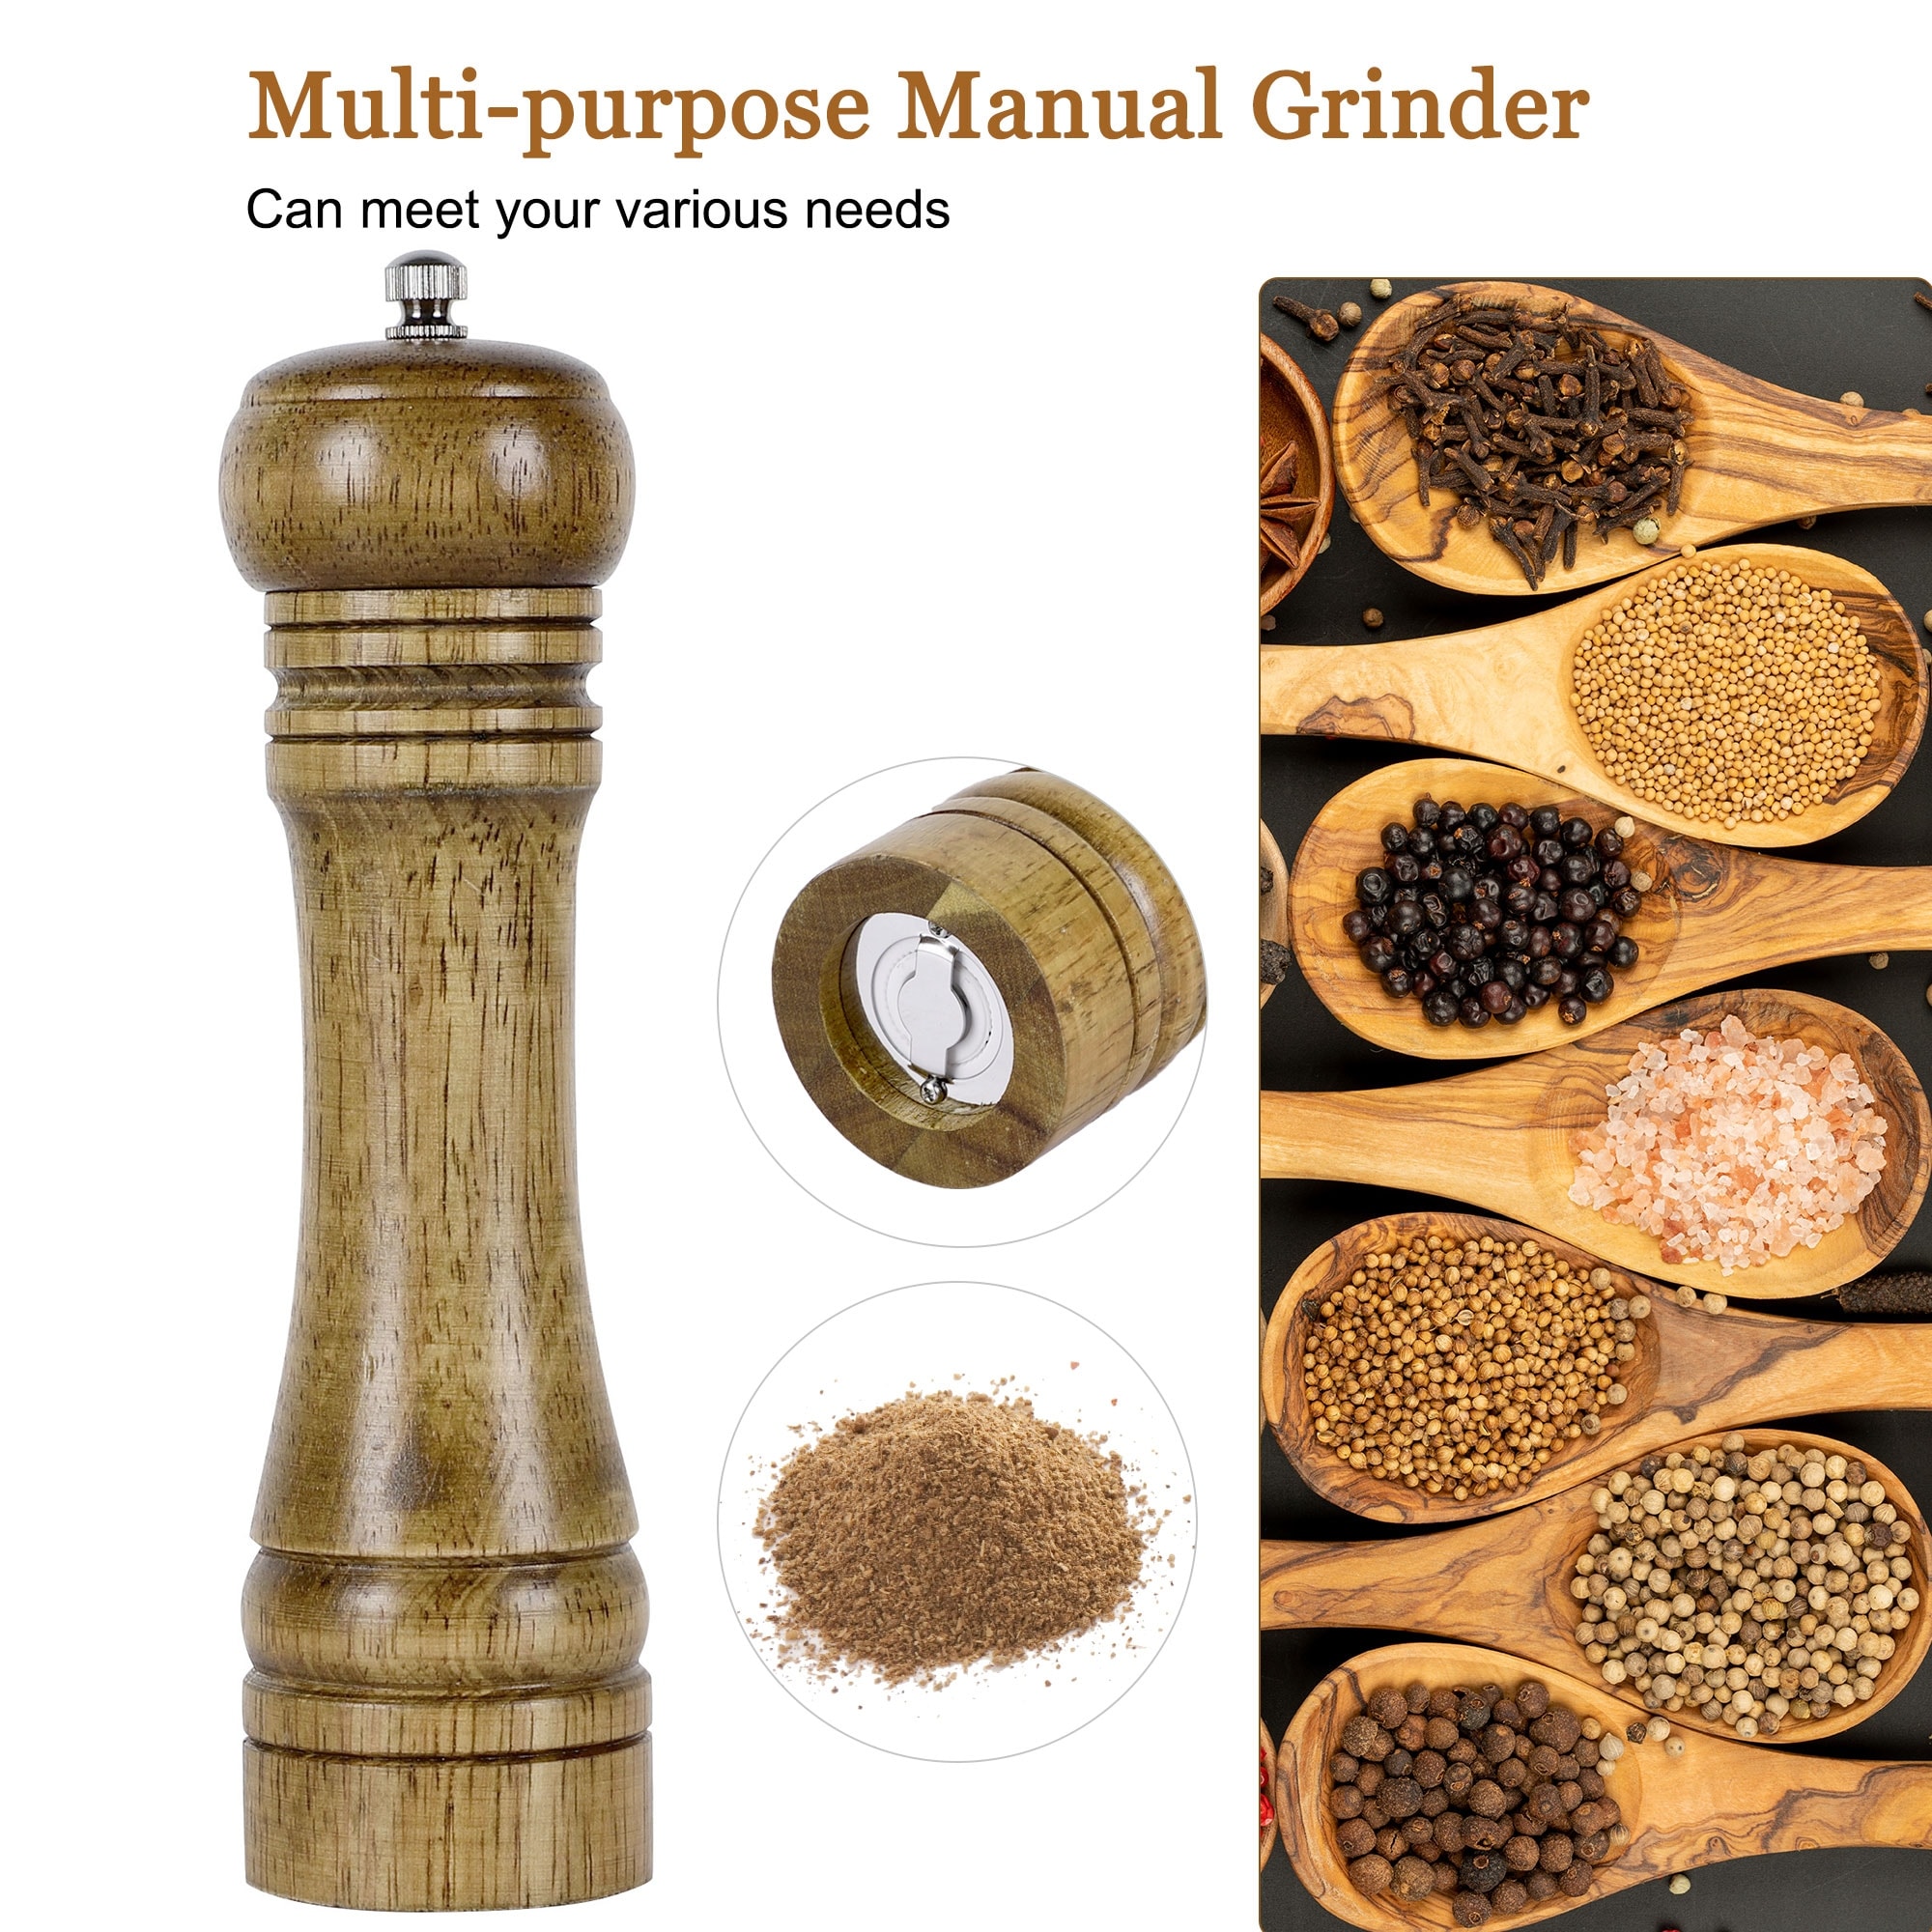 https://ak1.ostkcdn.com/images/products/is/images/direct/a18afba5a38264b6506dba2d50aaa6c37ee2596a/Home-Wooden-Hand-Crank-Twist-Salt-Spice-Pepper-Mill-Grinder-Shaker-Bronze-Tone.jpg